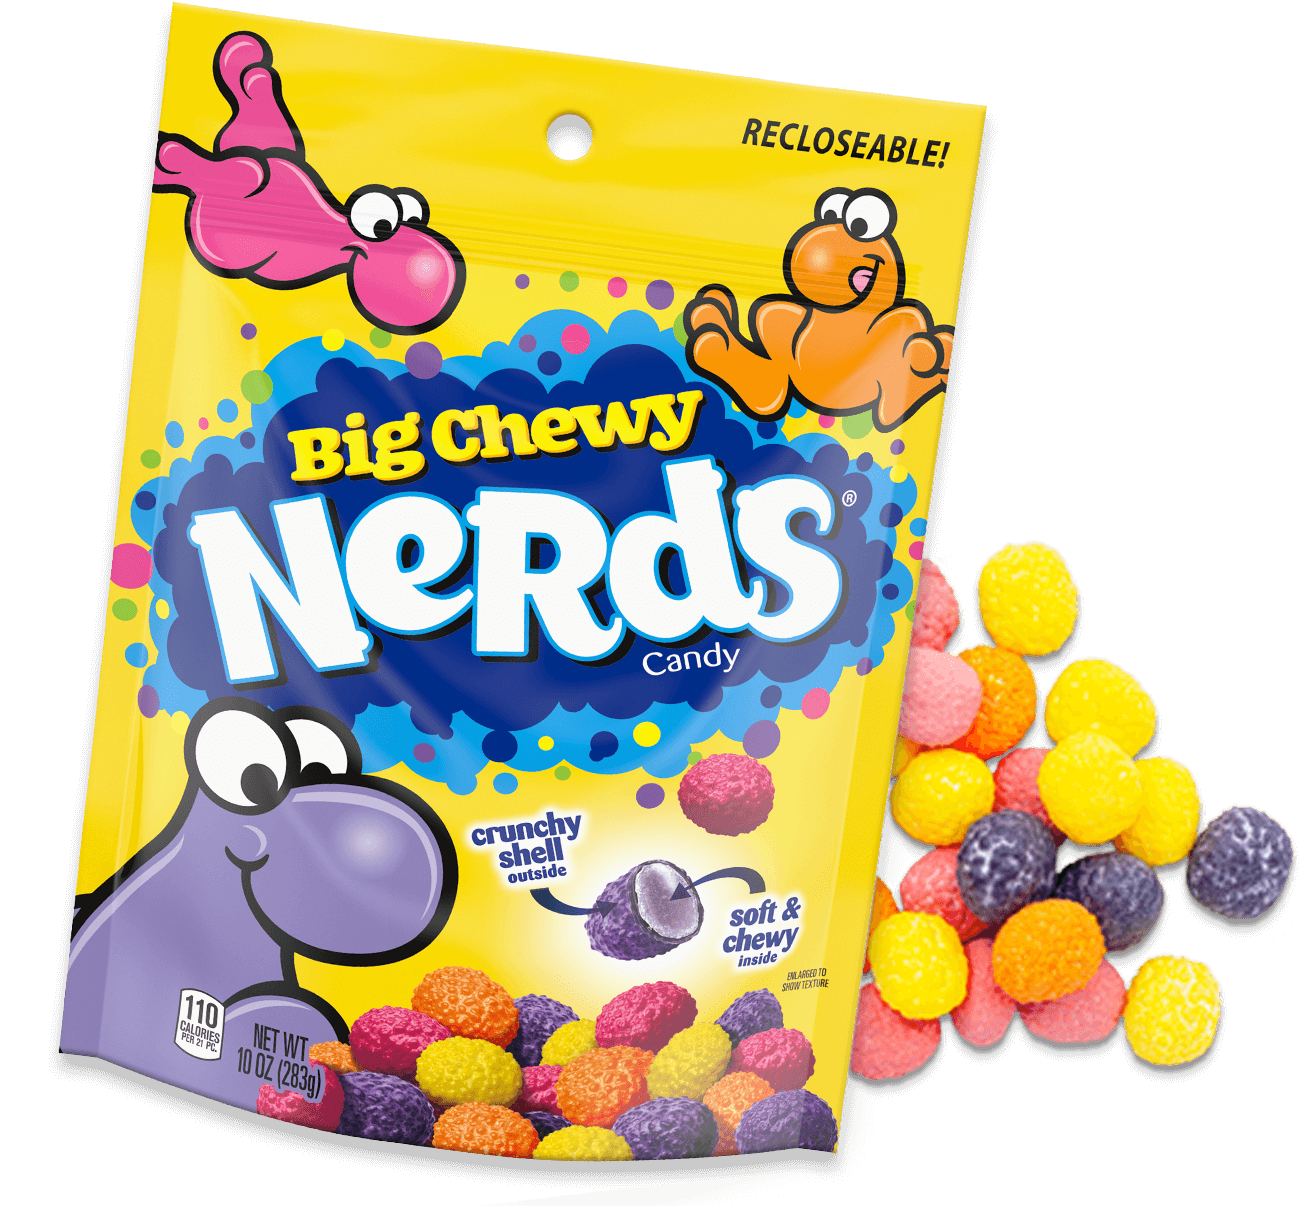 Big Crunchy Chewy NERDS Candy for Your Taste Buds